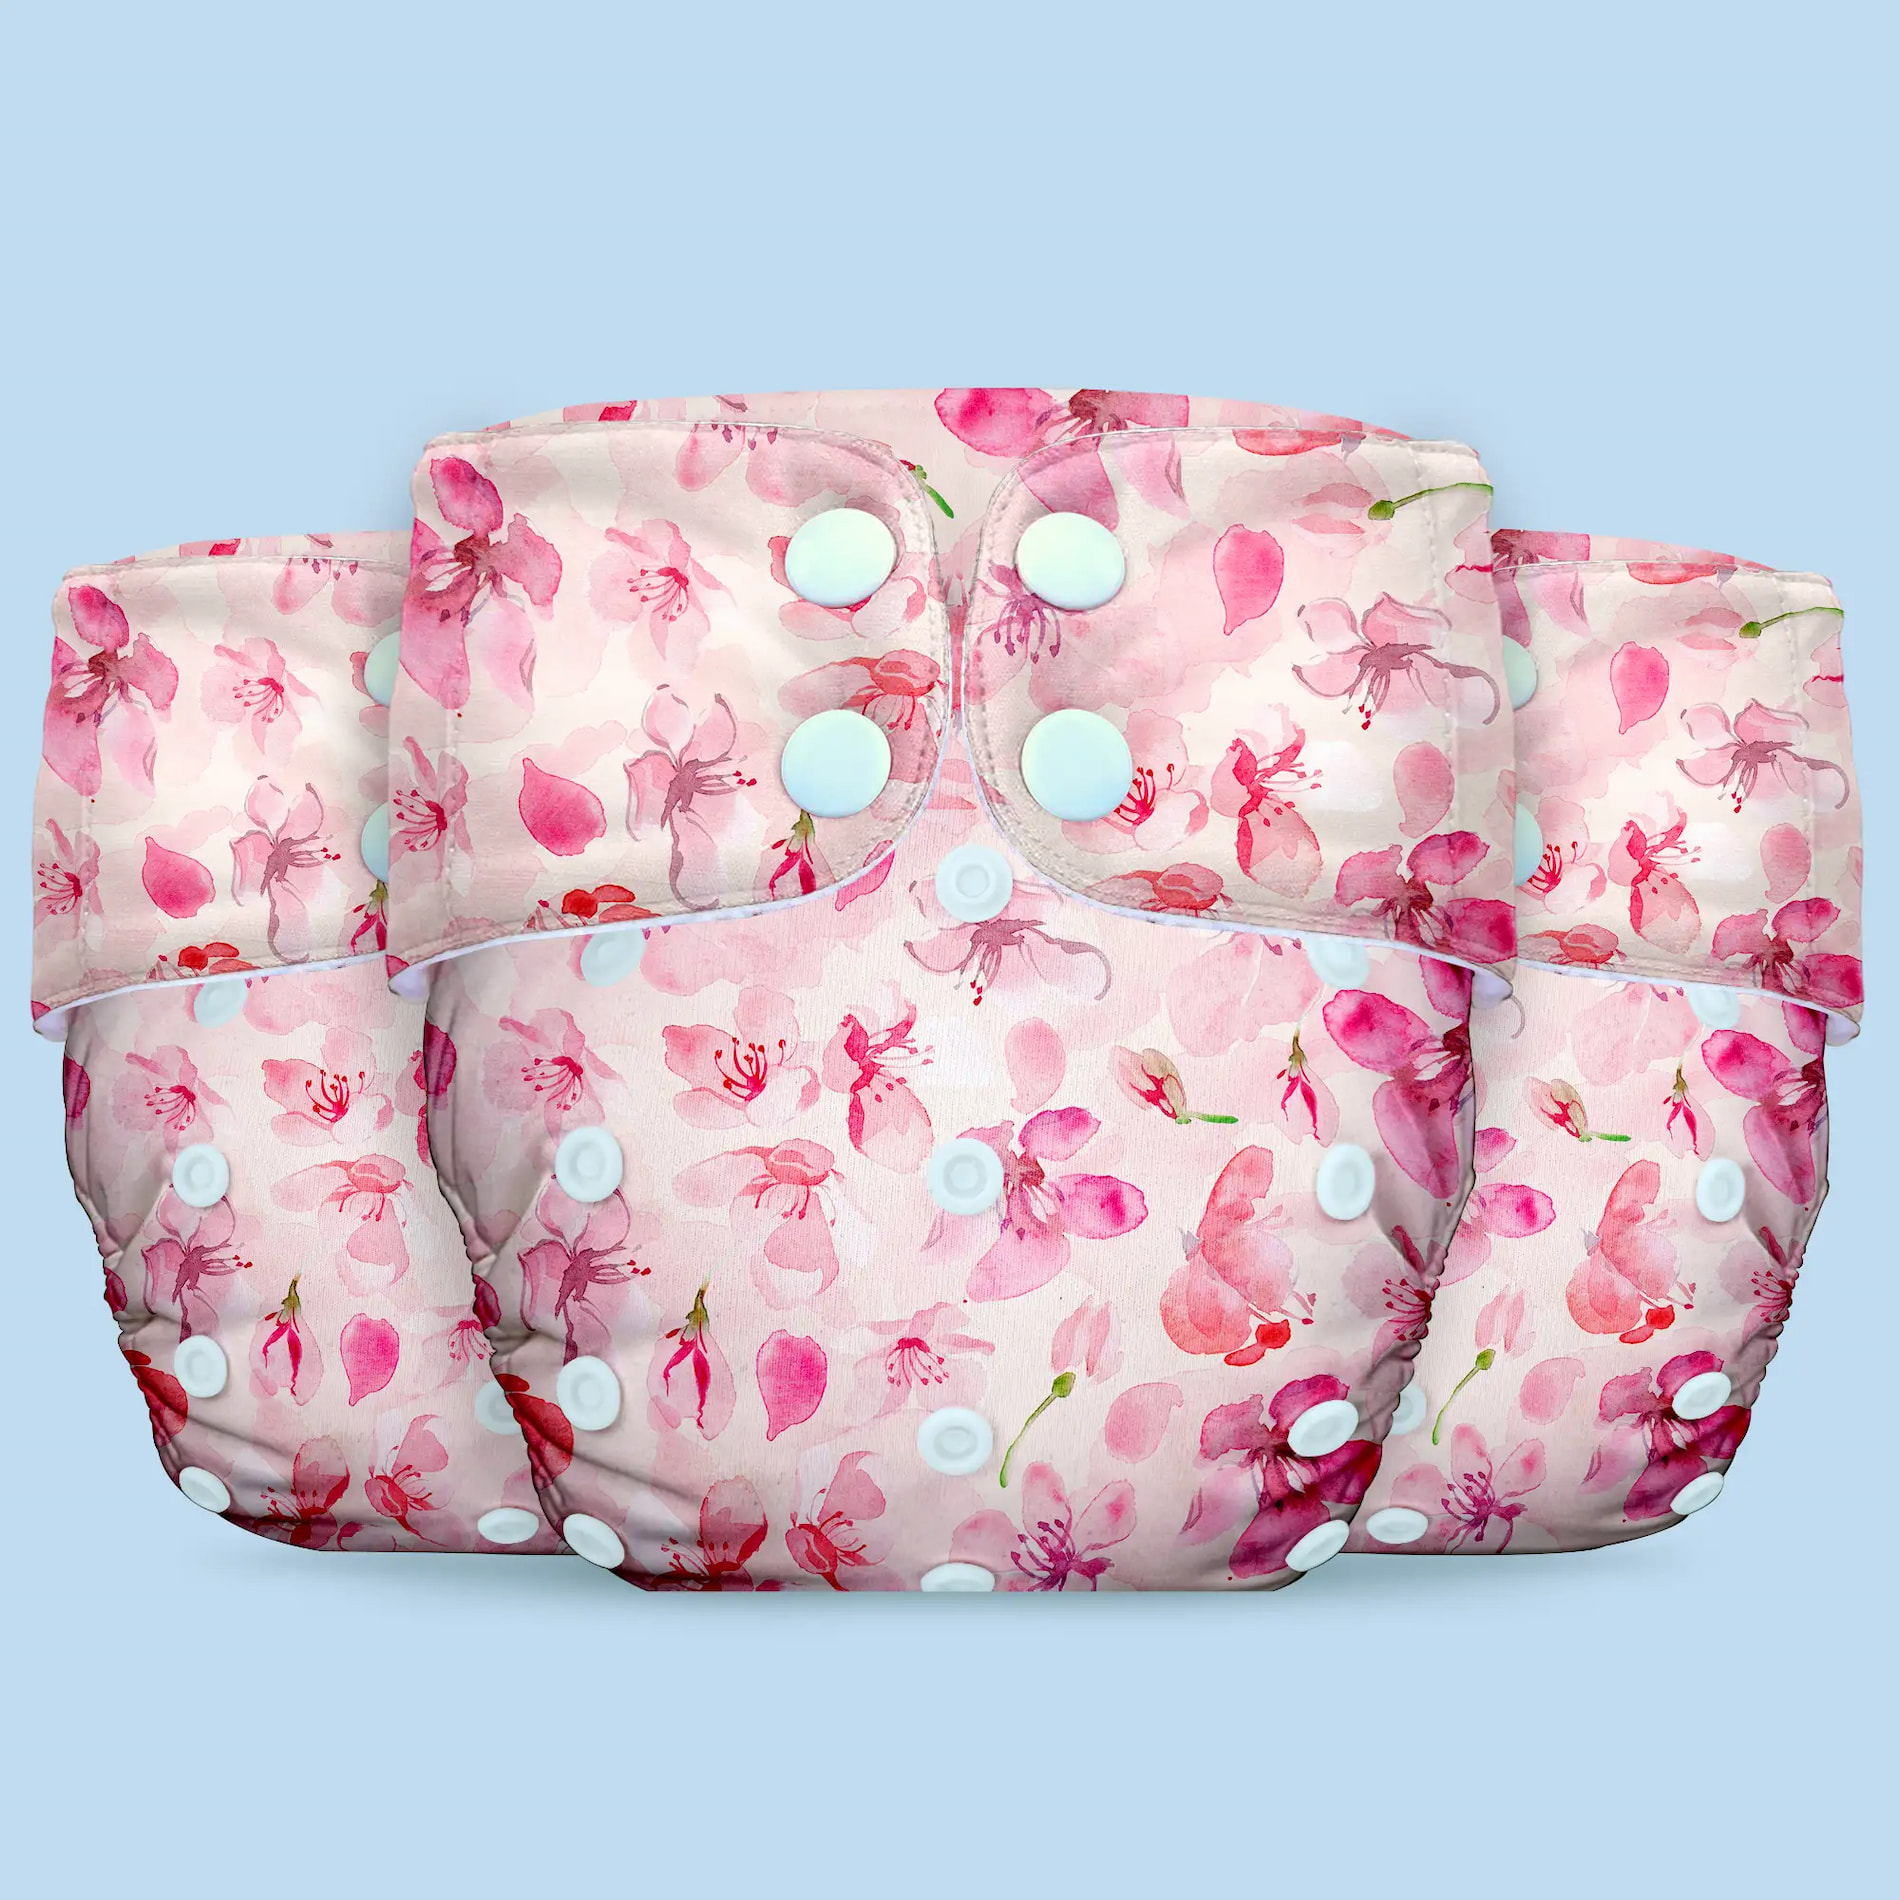 Adjustable & Reusable Cloth Diaper - Cherry Blossom - Pack of 3